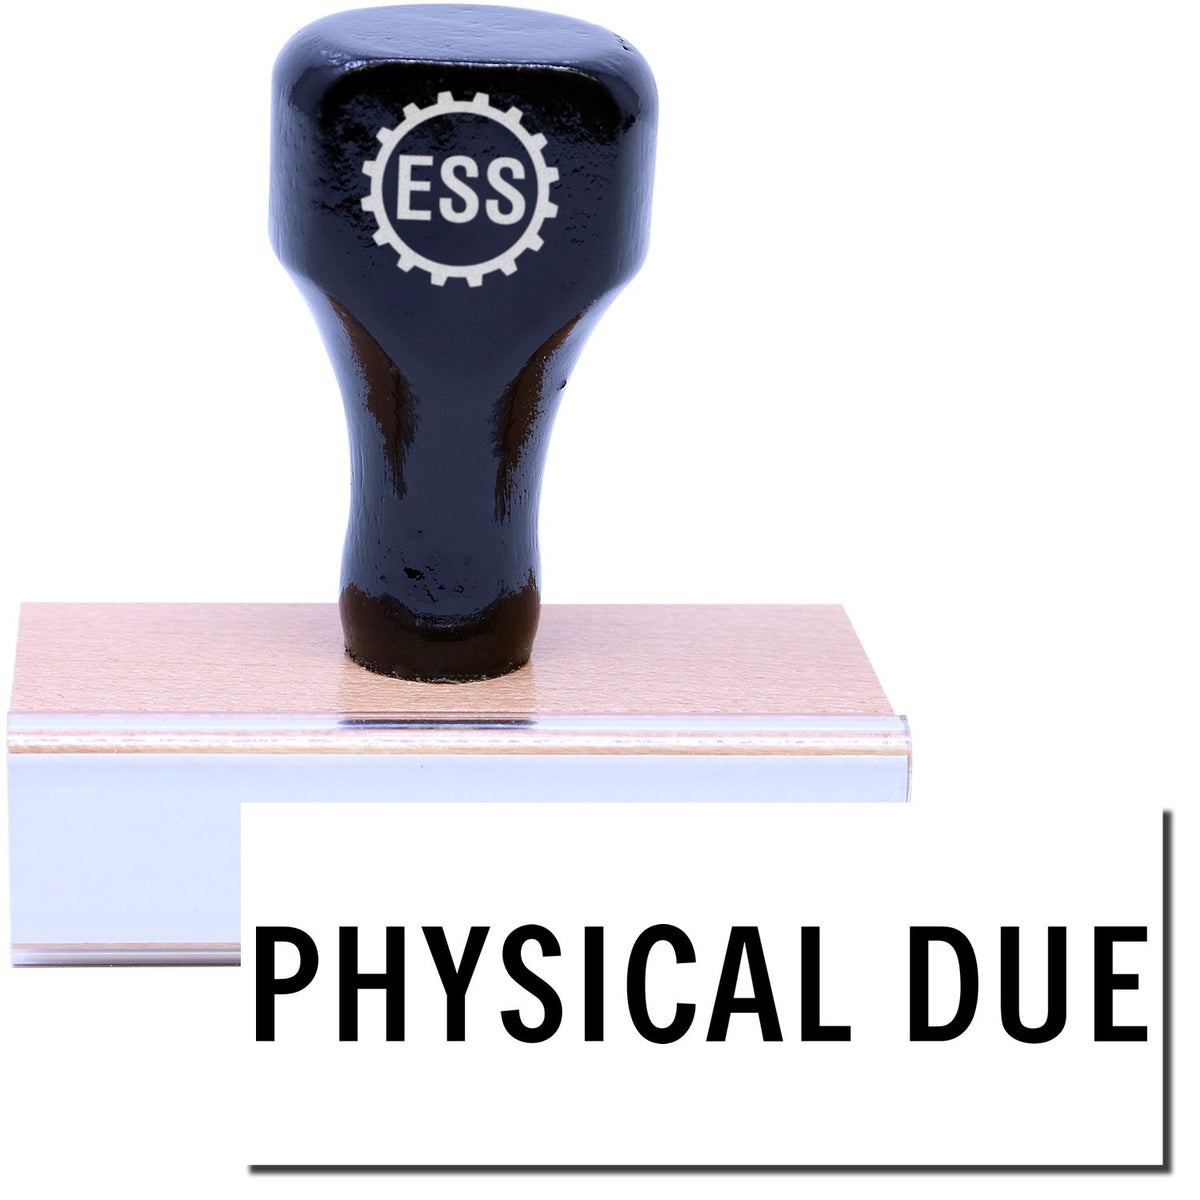 A stock office rubber stamp with a stamped image showing how the text &quot;PHYSICAL DUE&quot; in a large font is displayed after stamping.